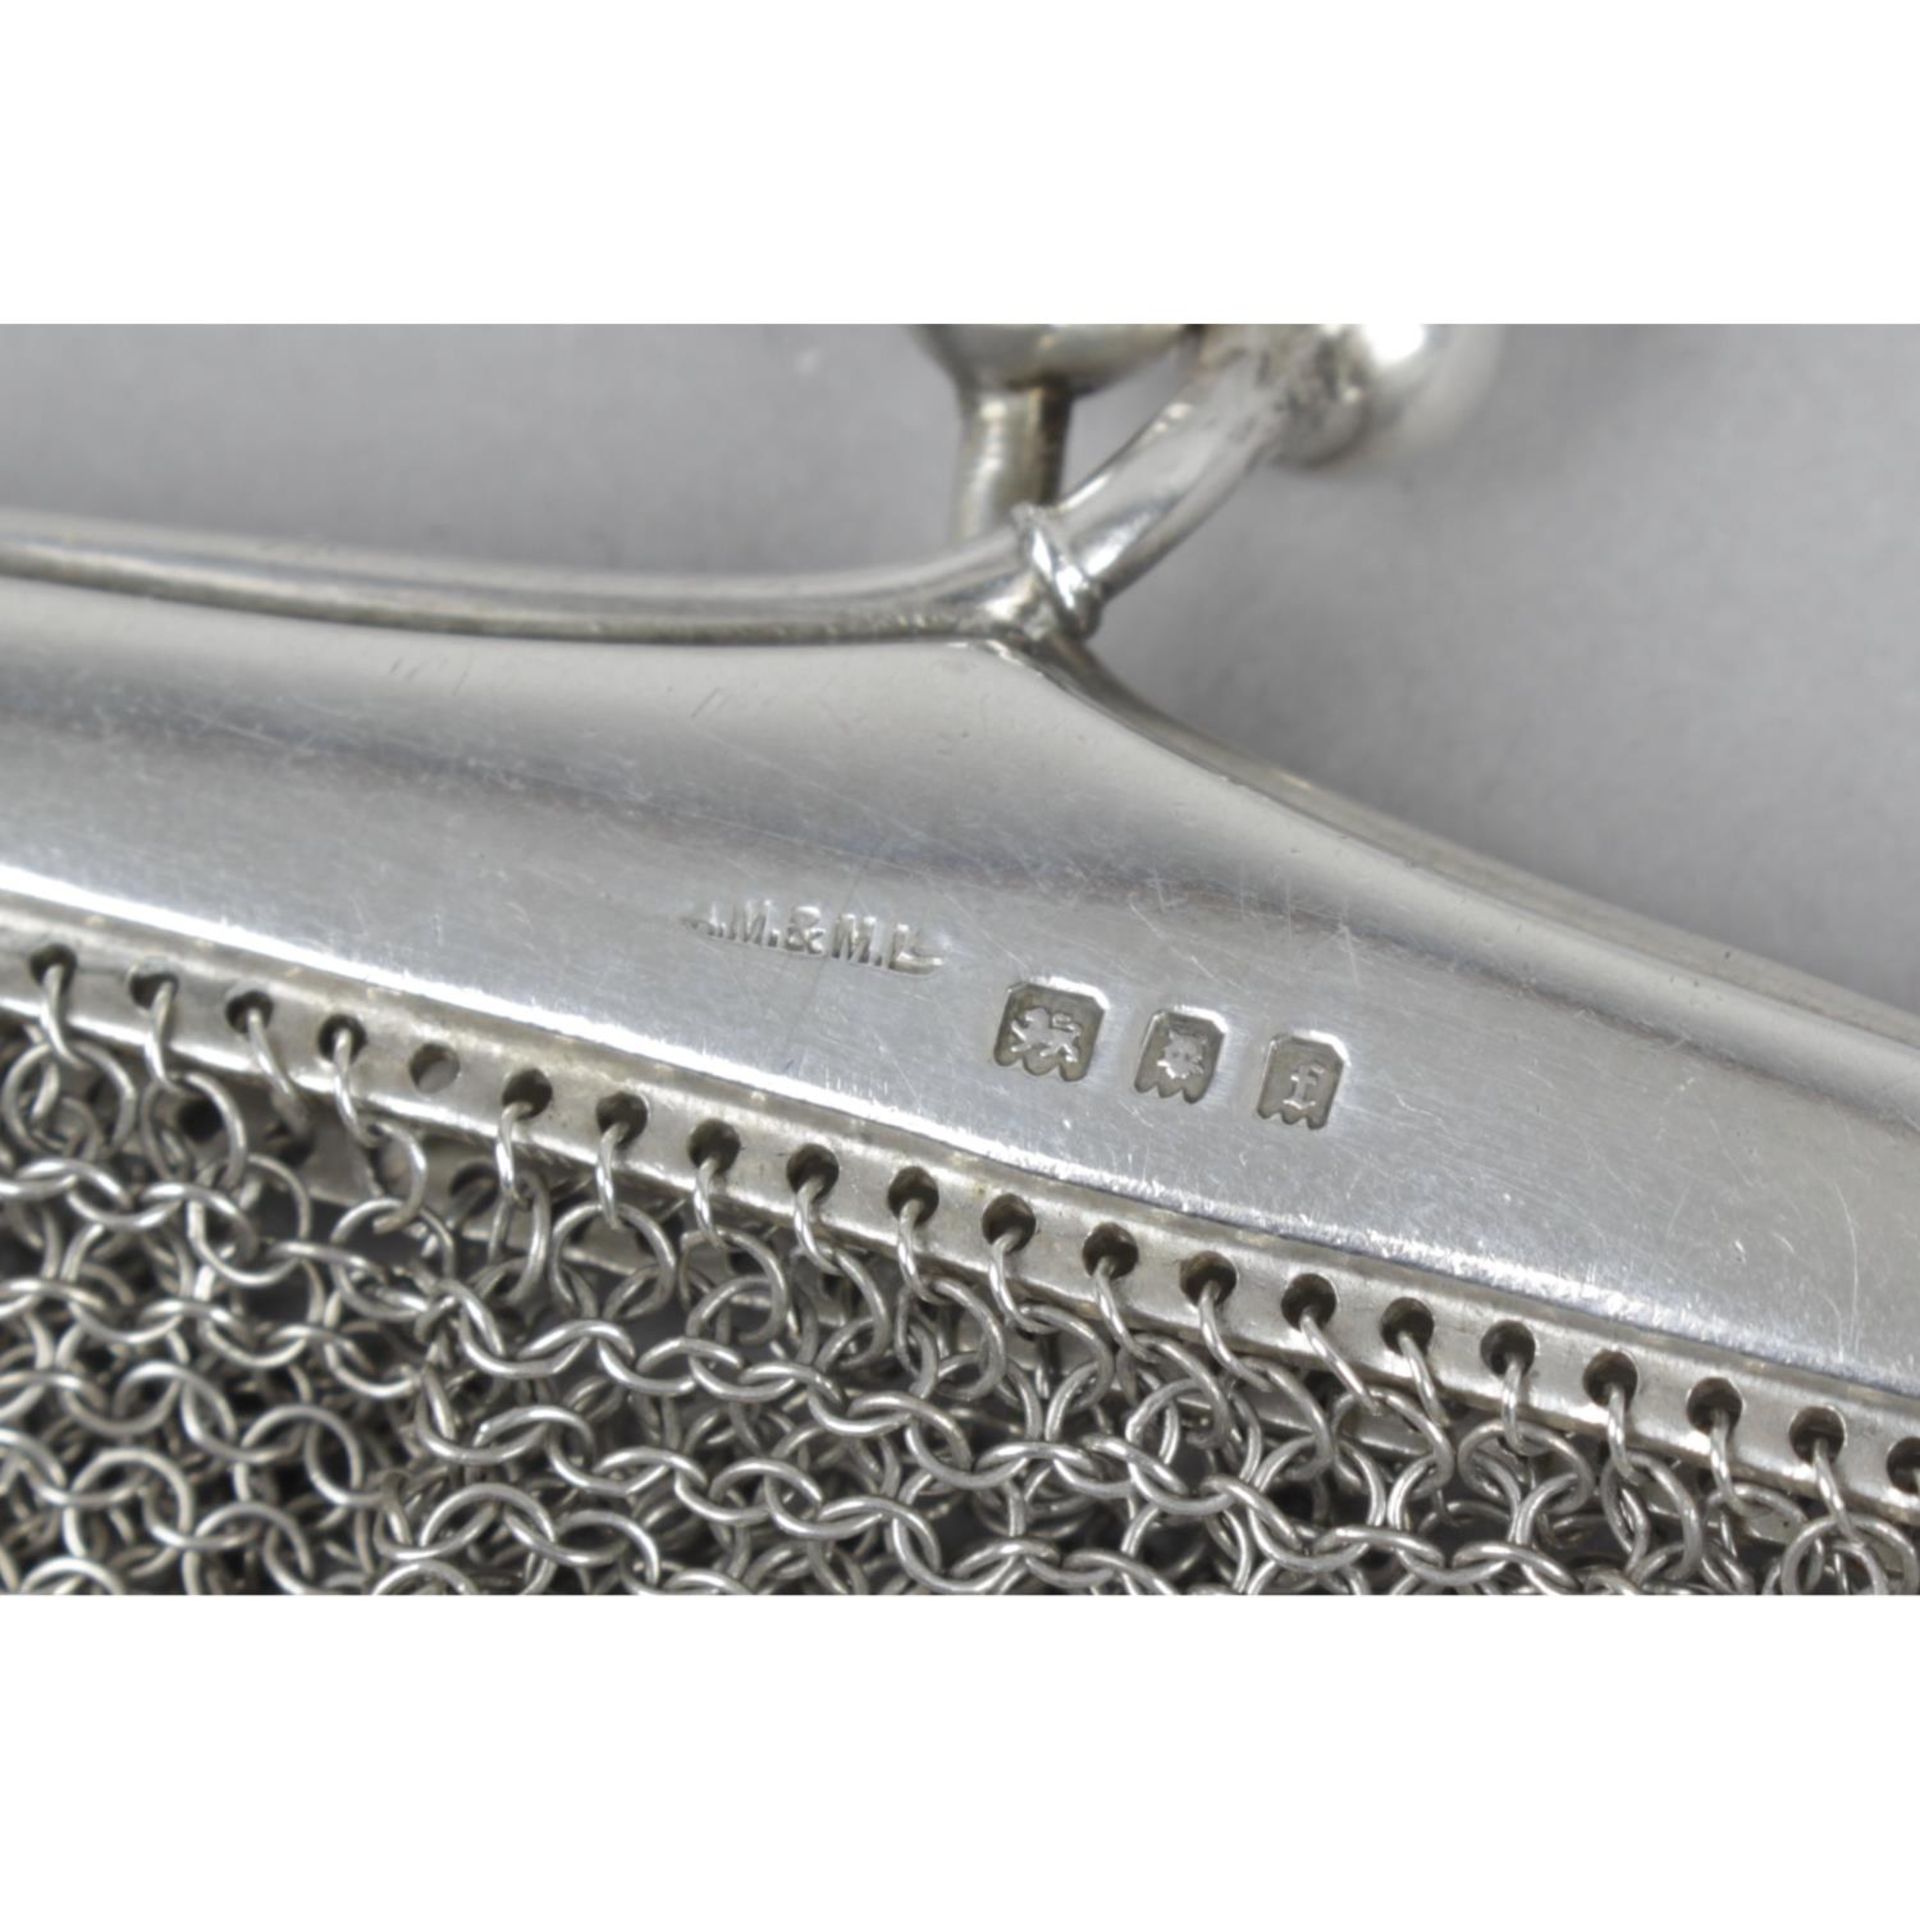 A 1920's silver mesh bag, - Image 2 of 3